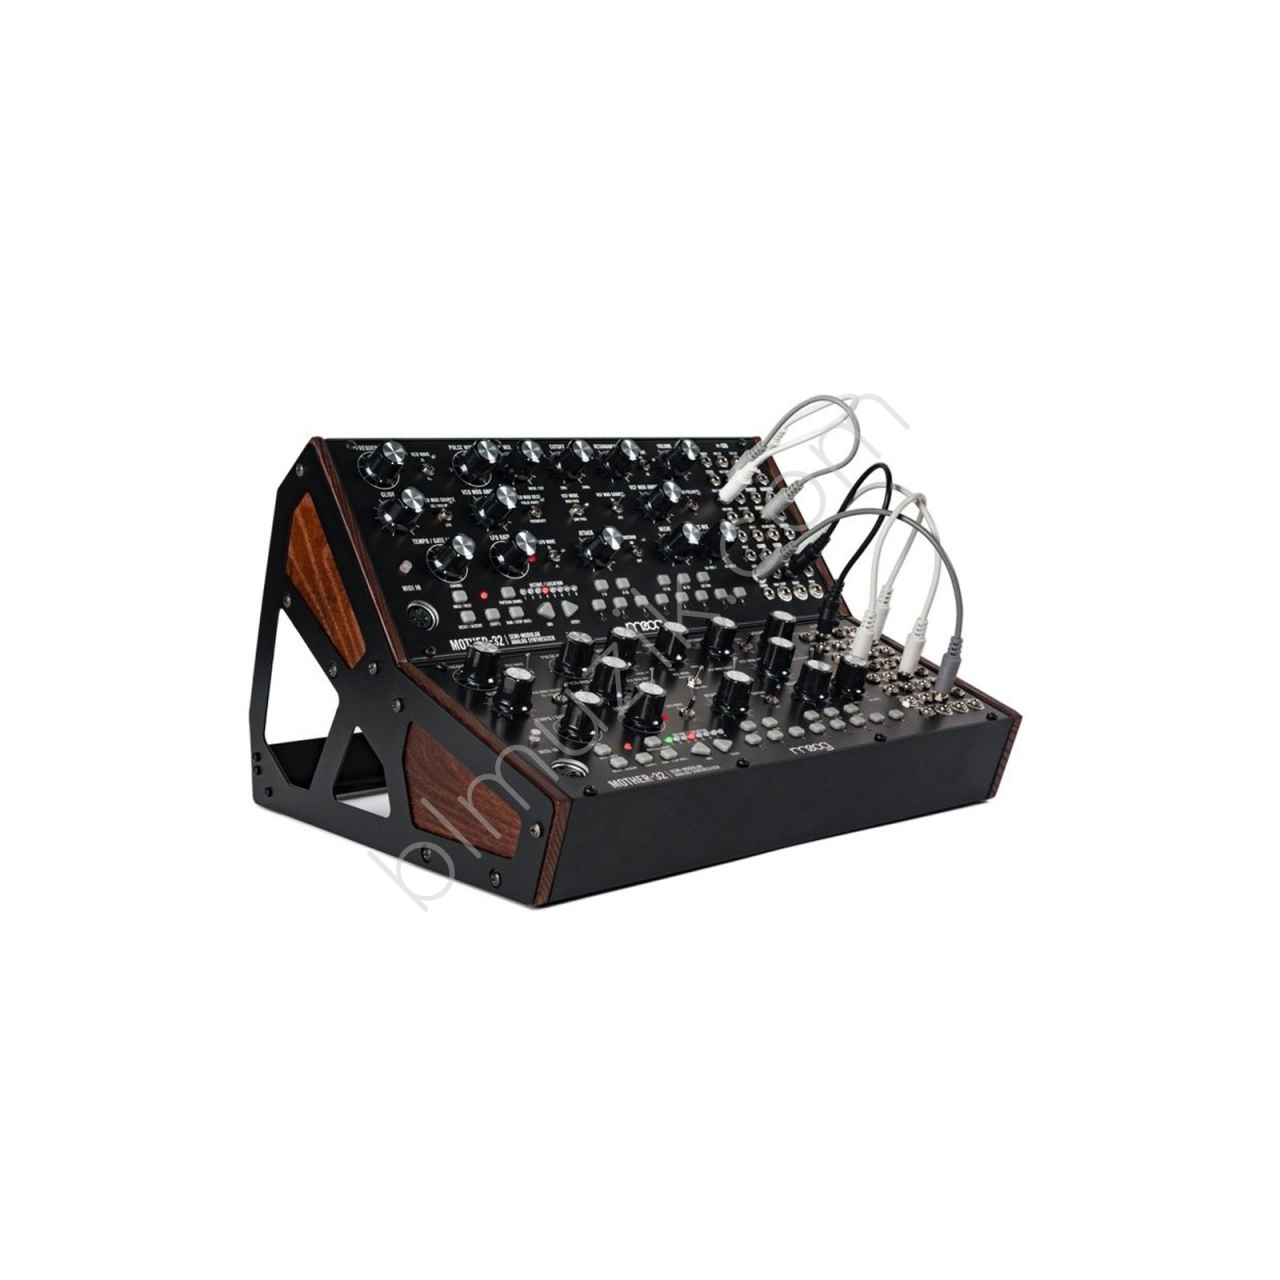 Mother-32 & DFAM Two-Tier Rack Kit